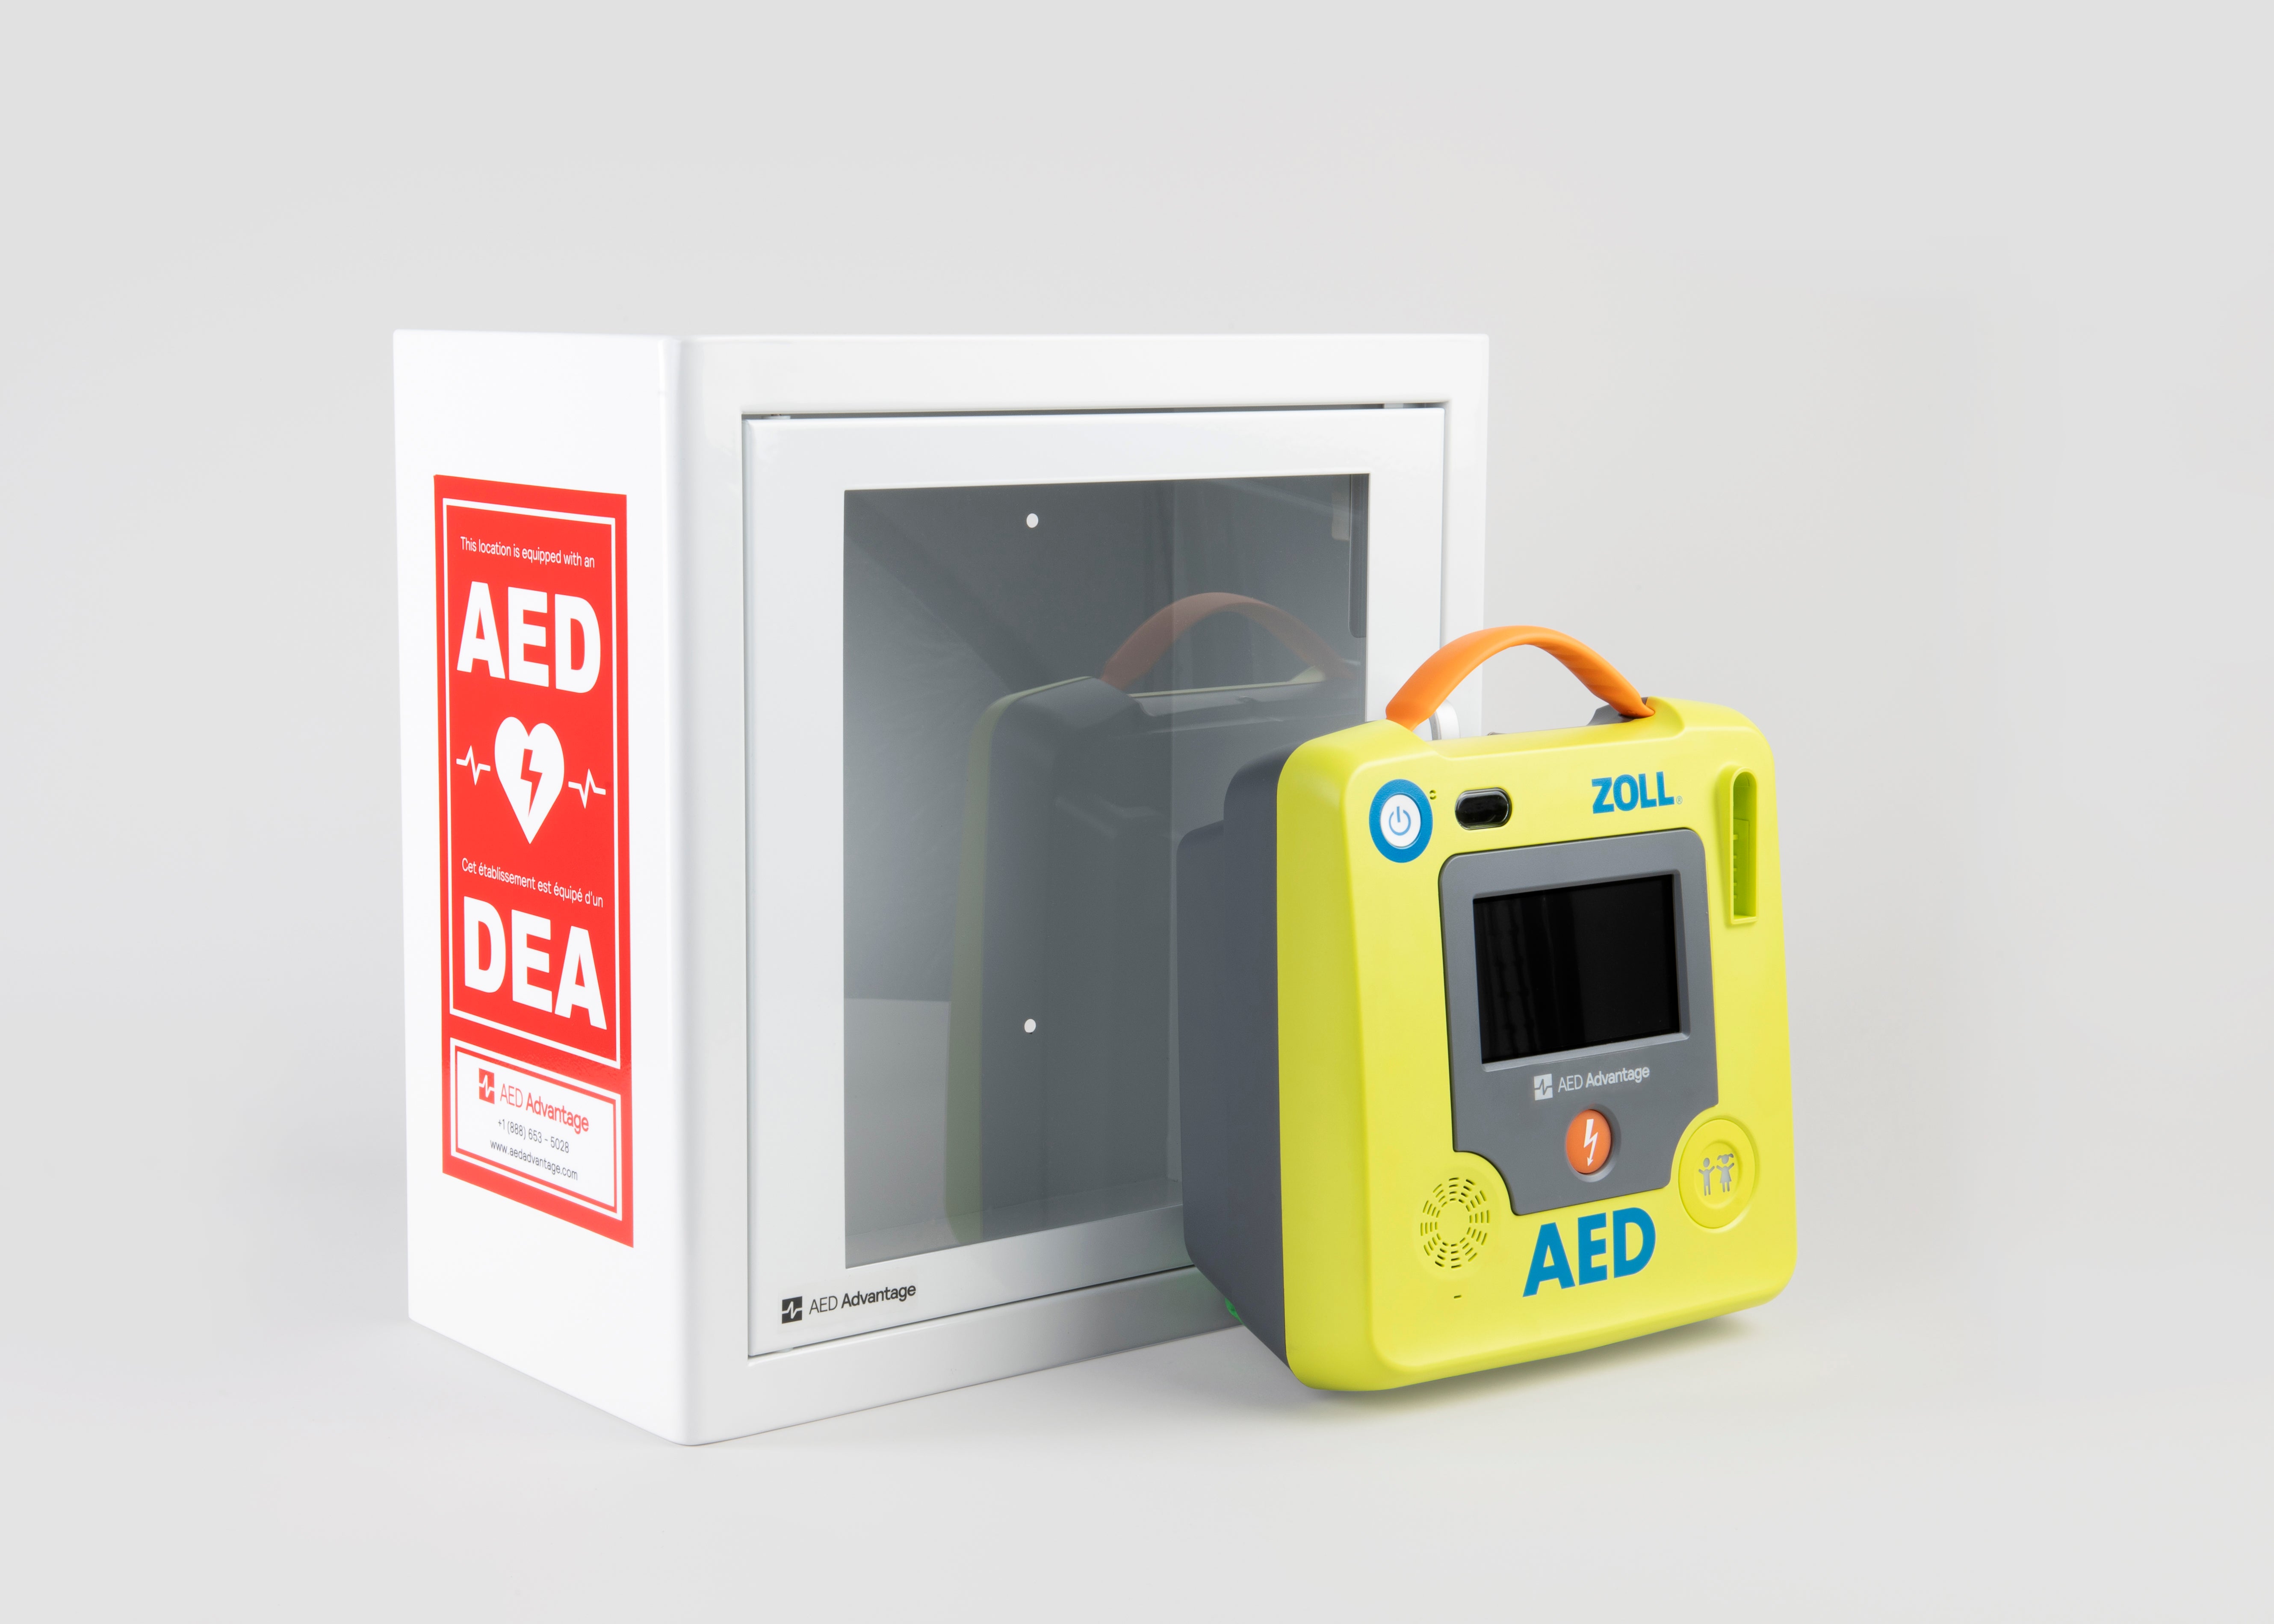 A green ZOLL AED 3 machine standing in front of a white metal cabinet with red decals